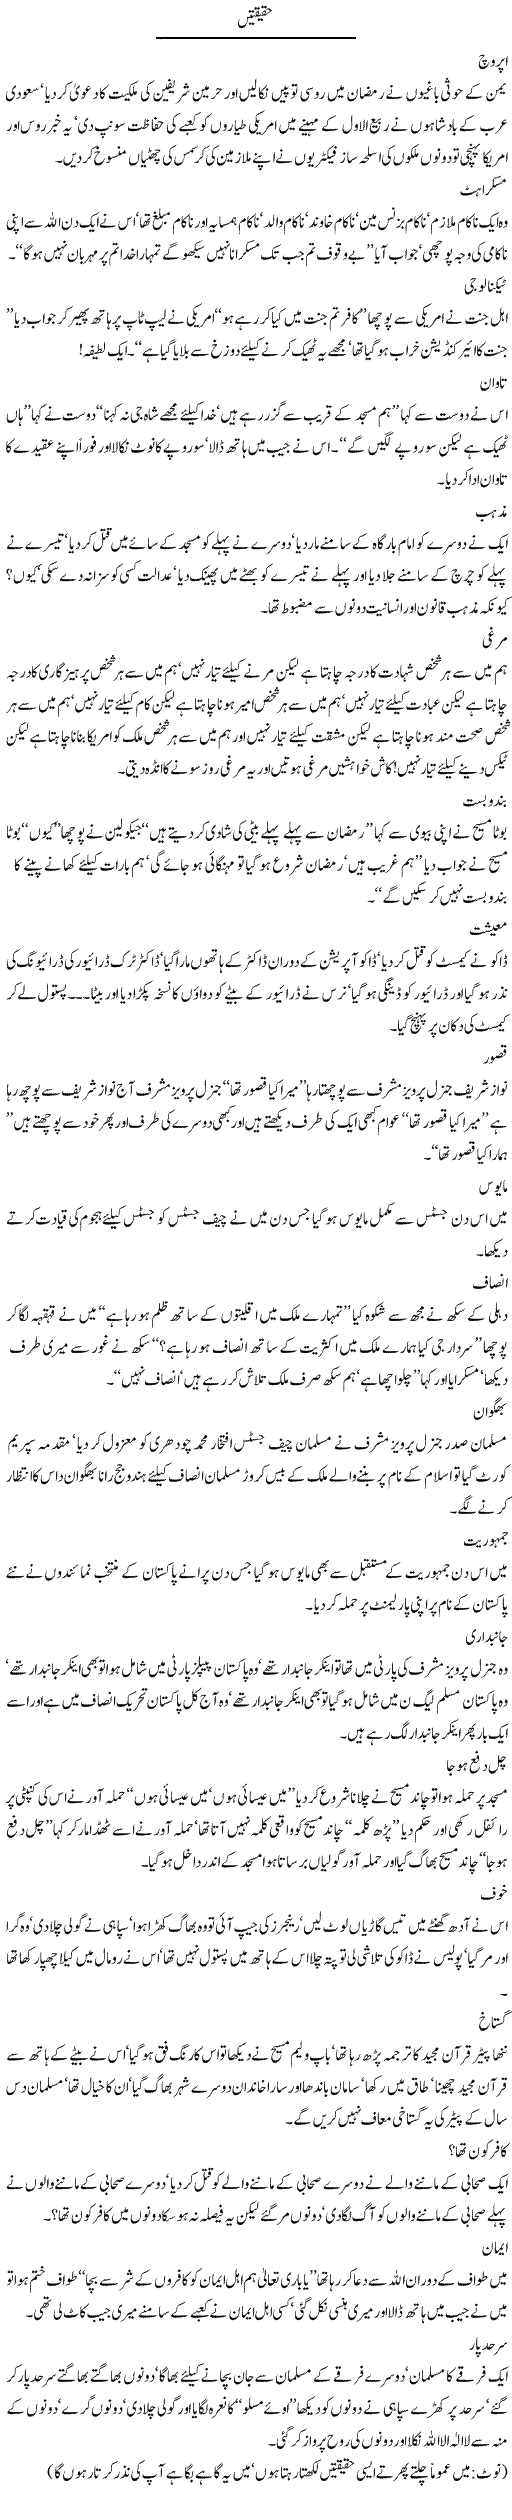 Haqeeqtain by Javed chaudhry